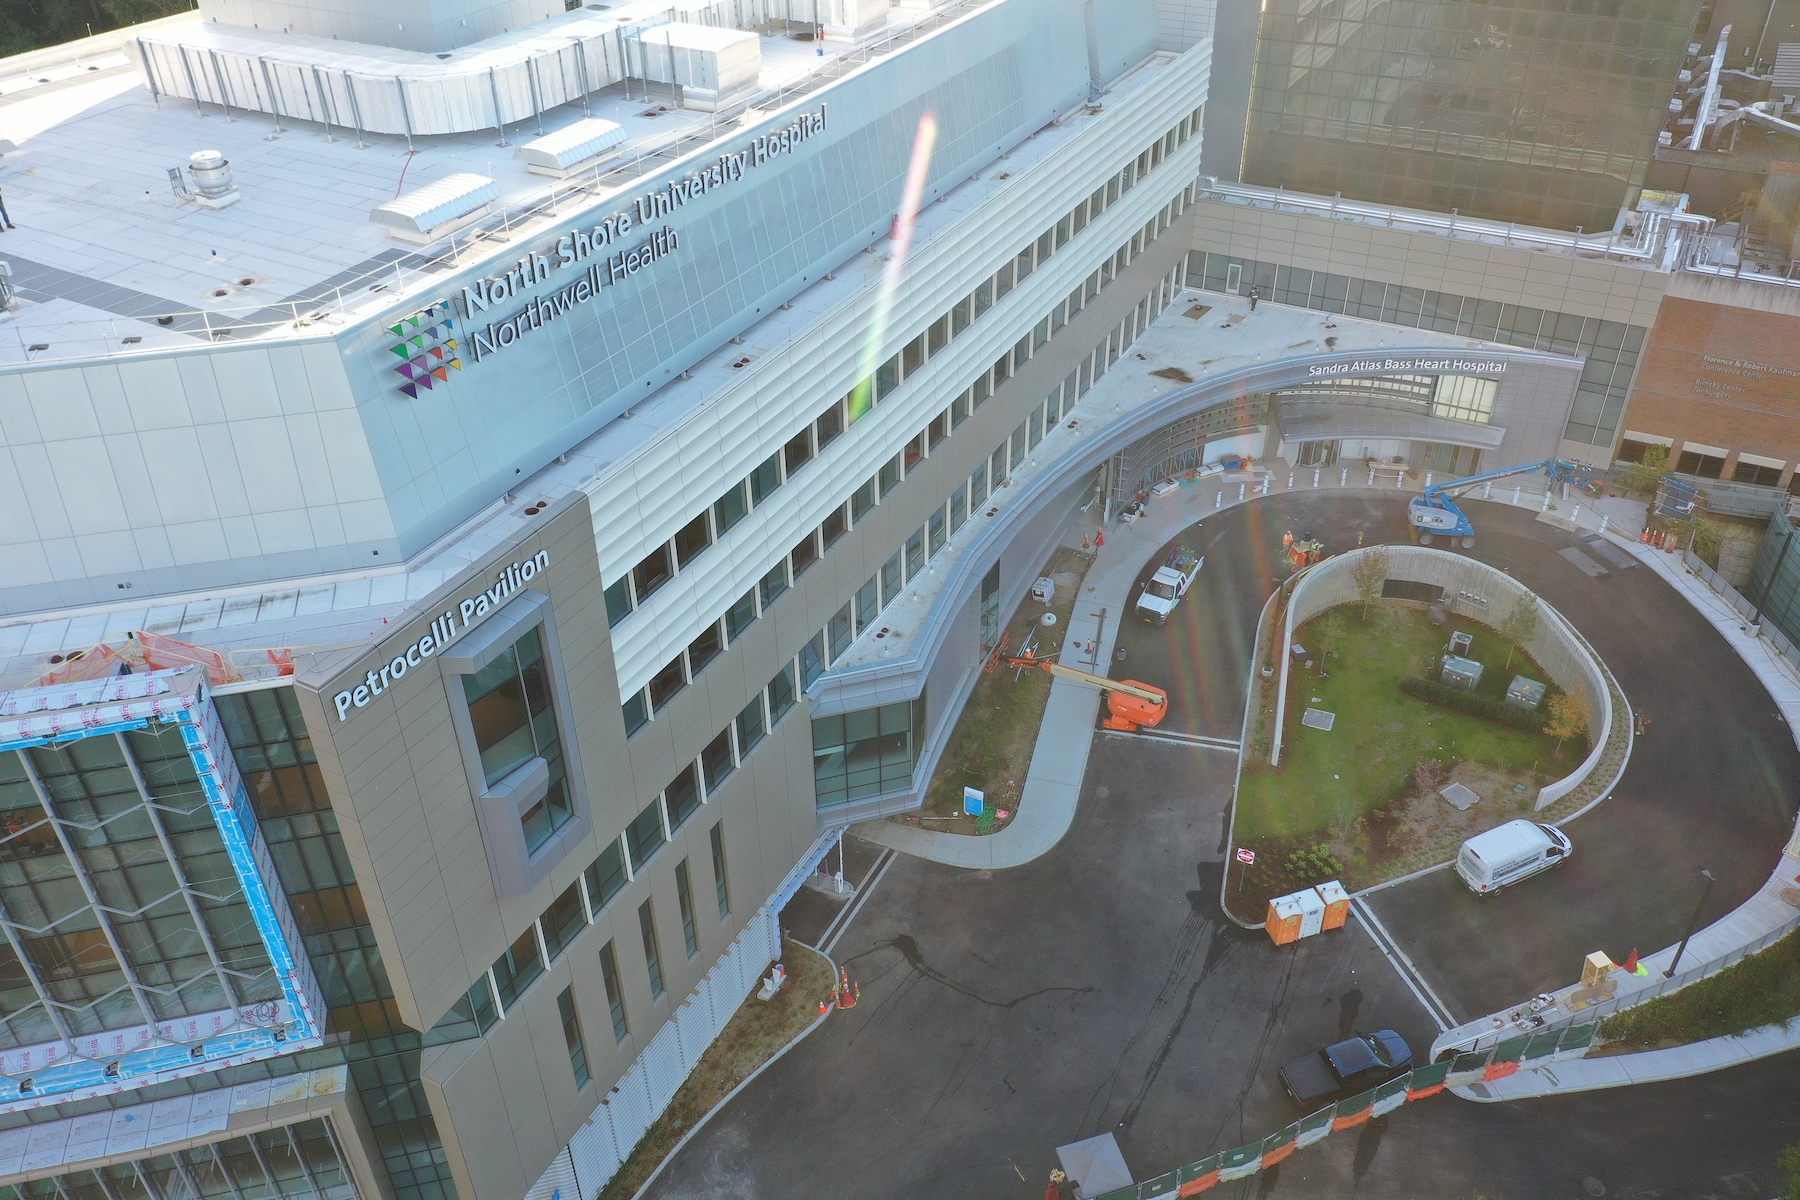 The eight-story Petrocelli Surgical Pavilion is attached to North Shore University hospital.